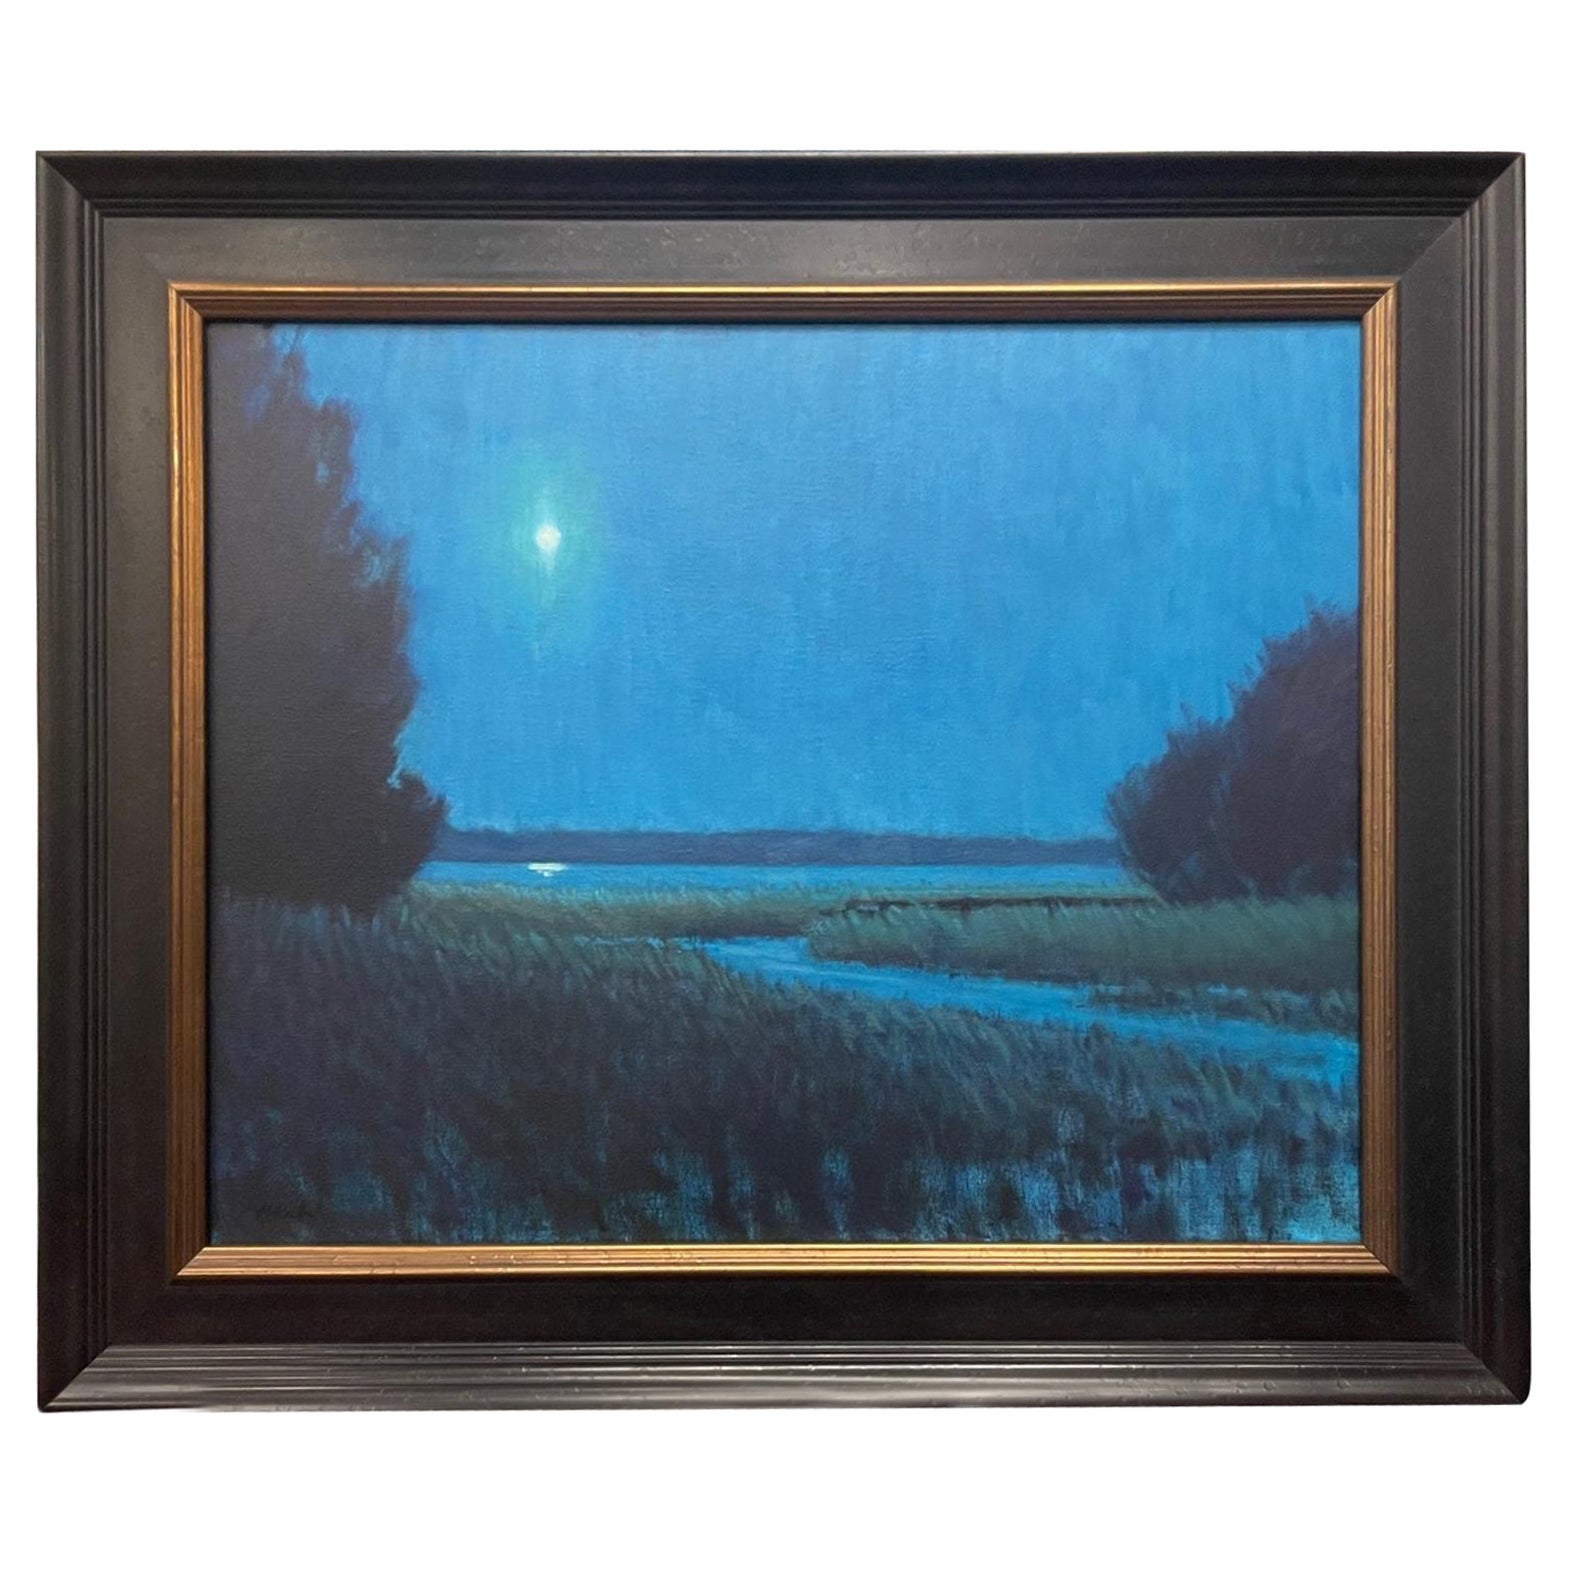 Framed Oil on Canvas "In the Still of the Night", Michael Reibel